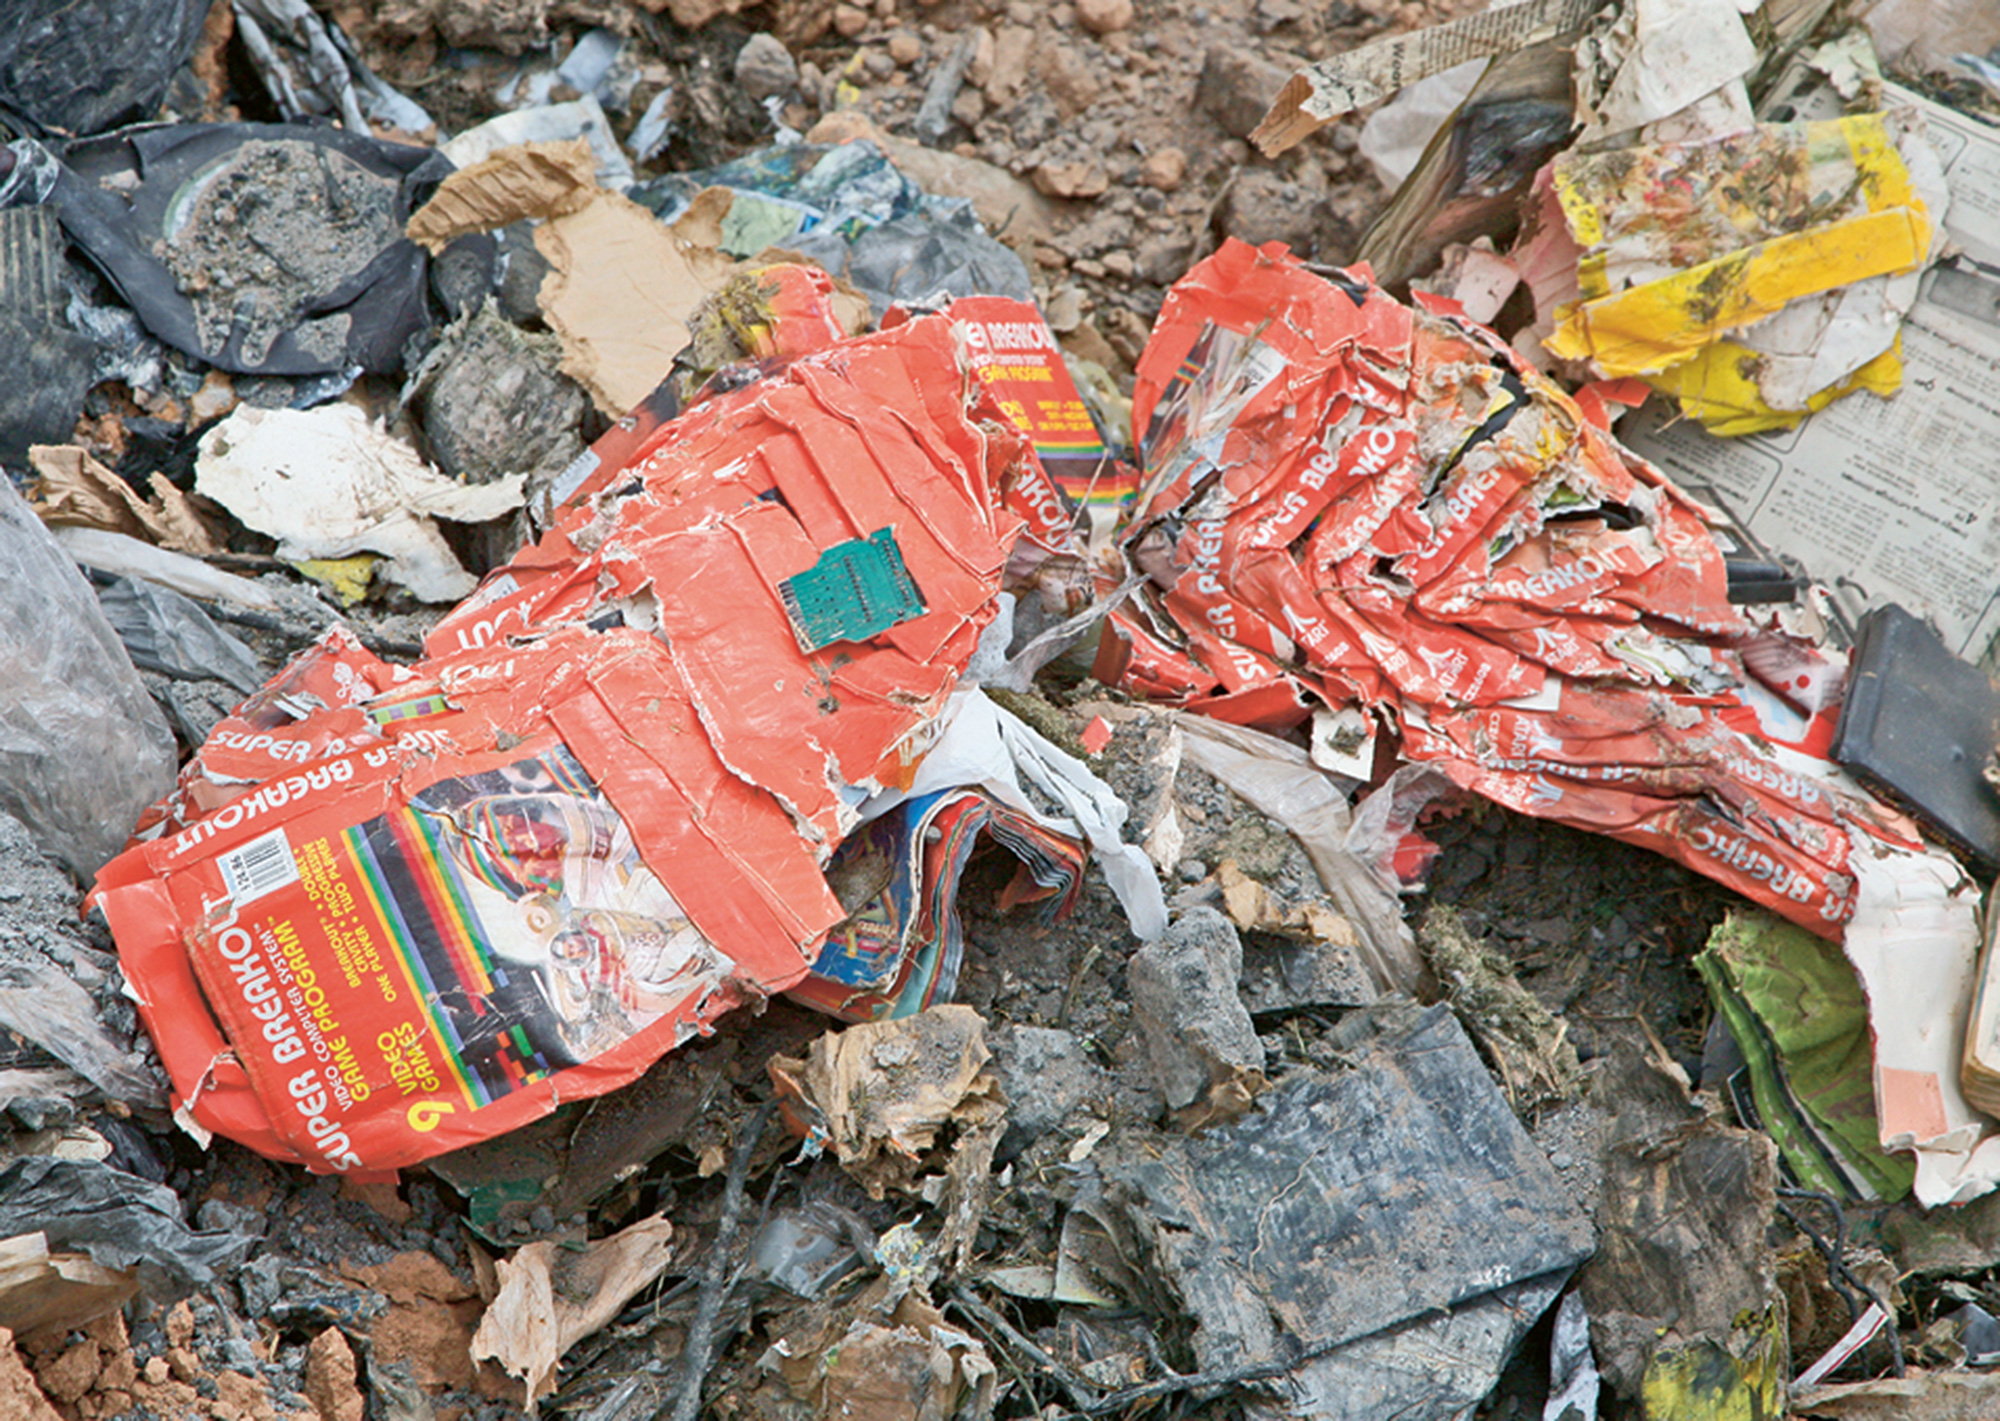 A photograph of discarded merchandise at the Atari Incorporated landfill site in Alamogordo, New Mexico.